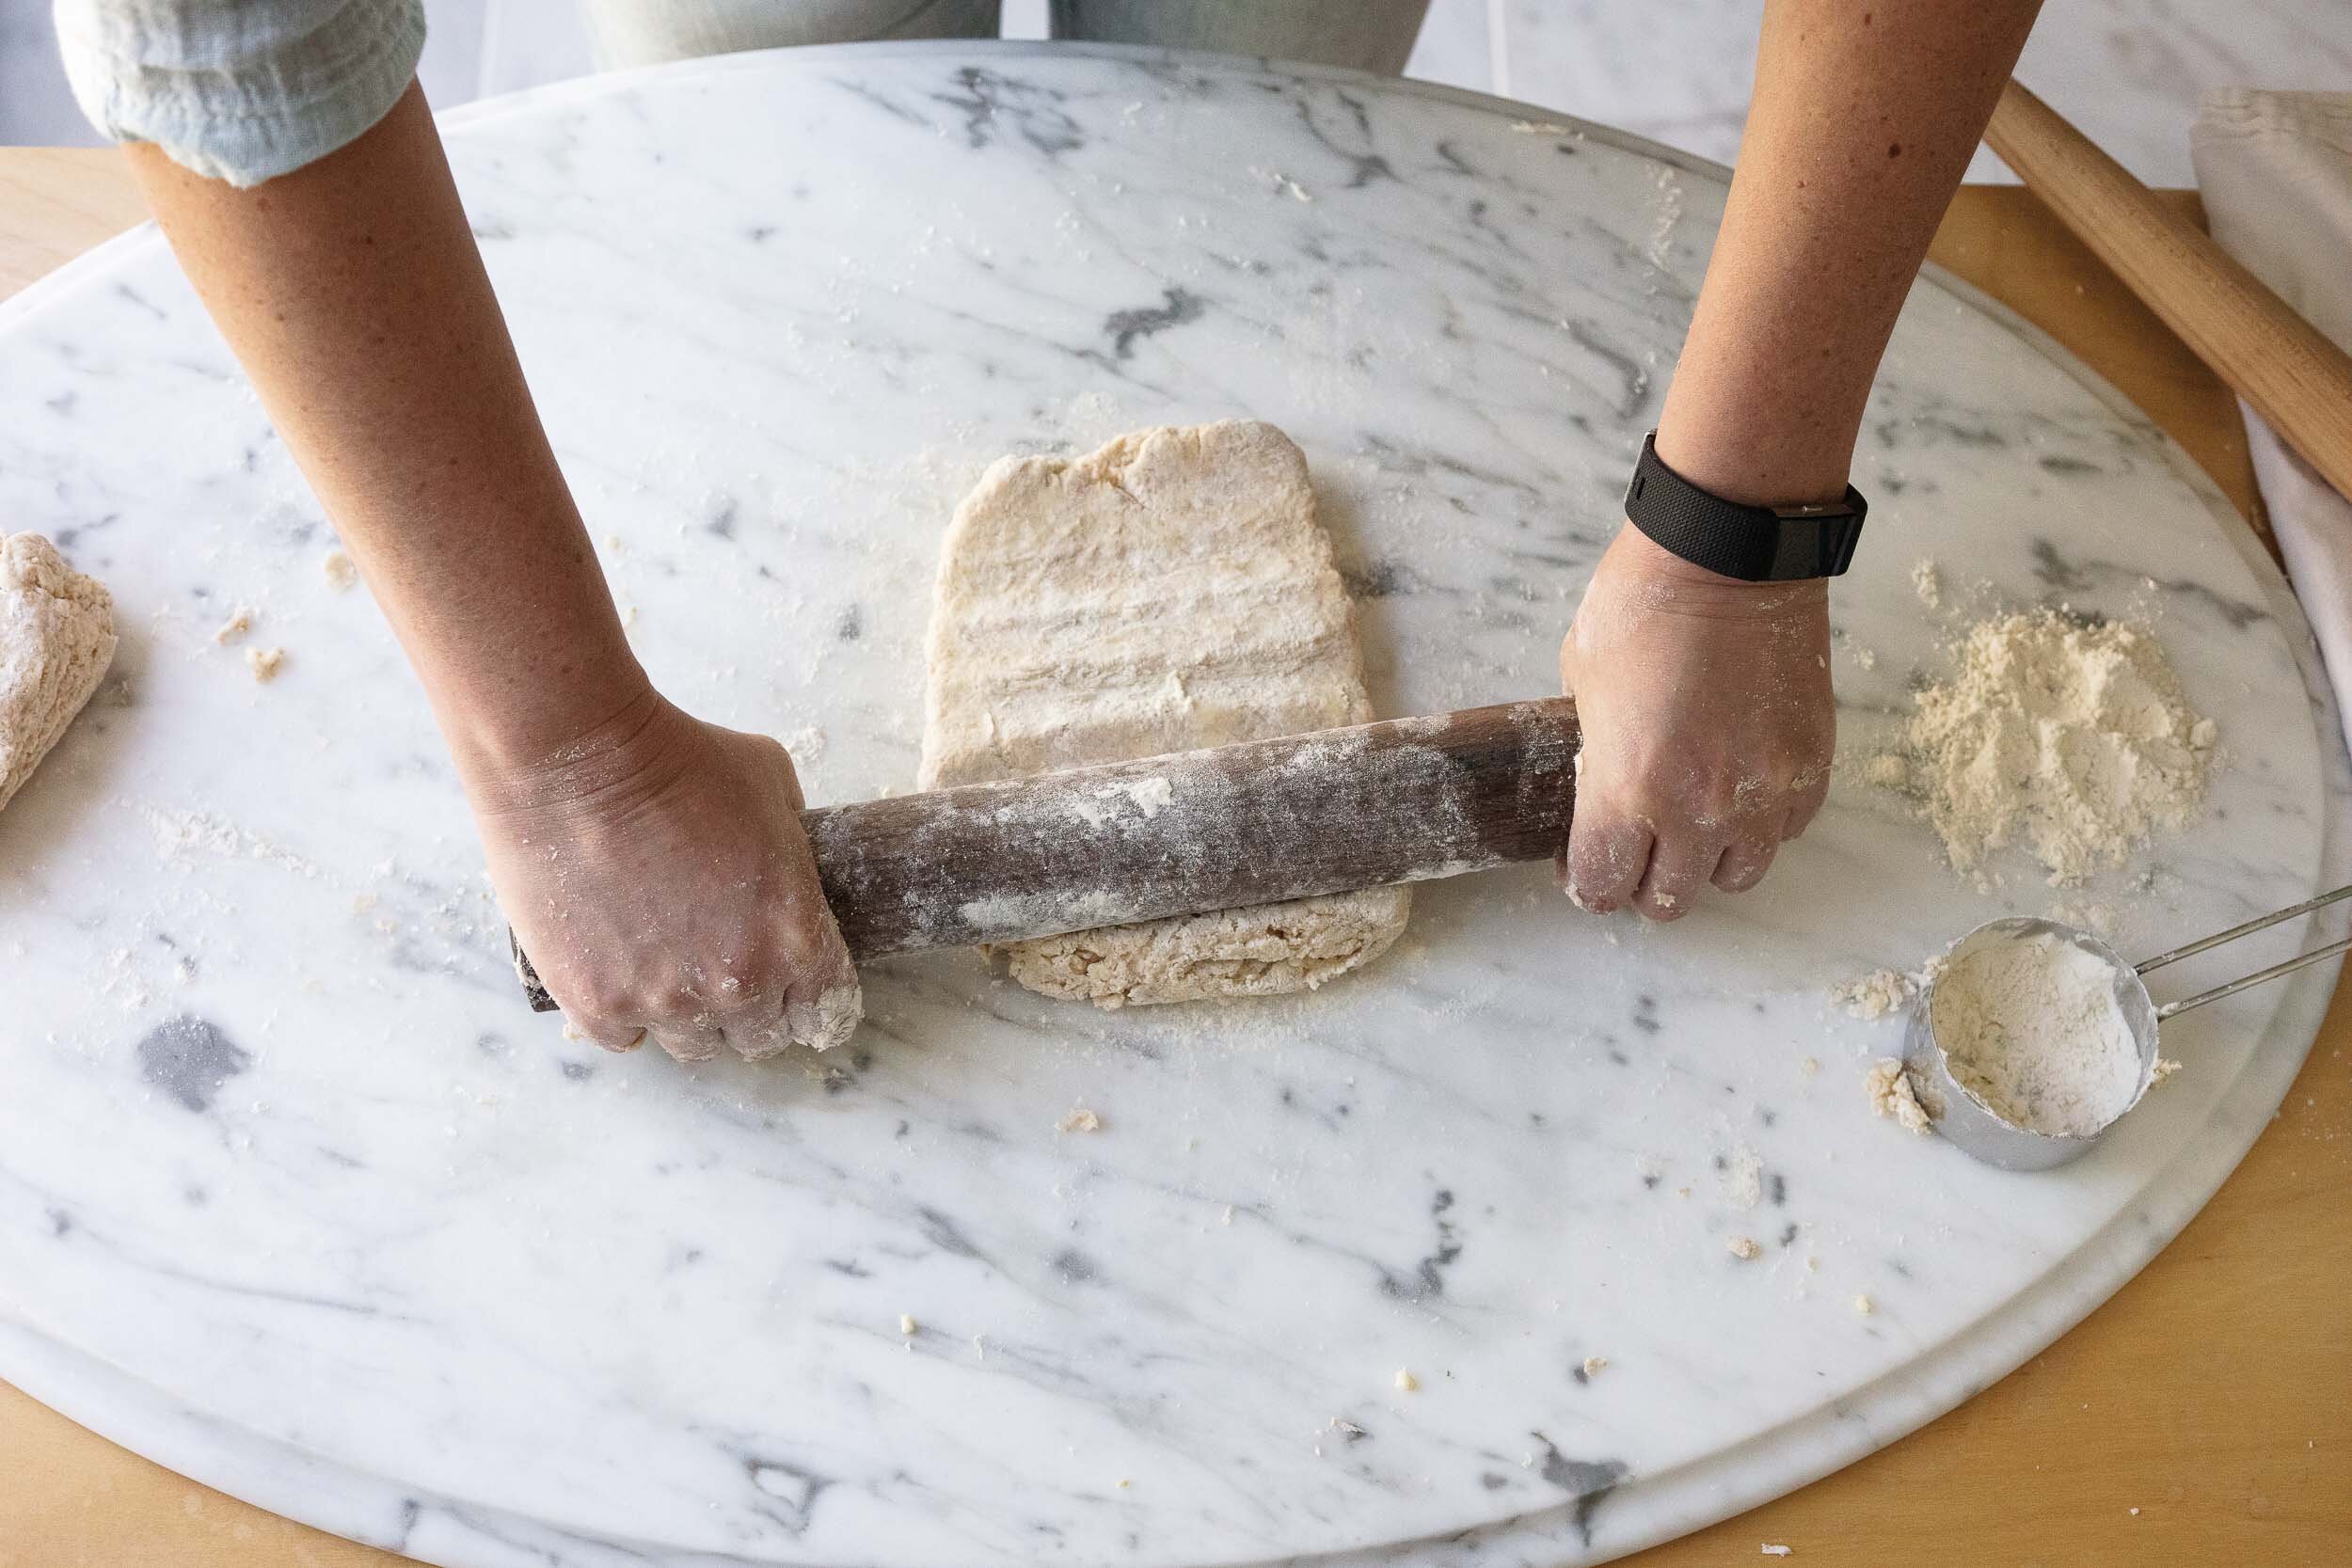 Press into a rectangle with your rolling pin